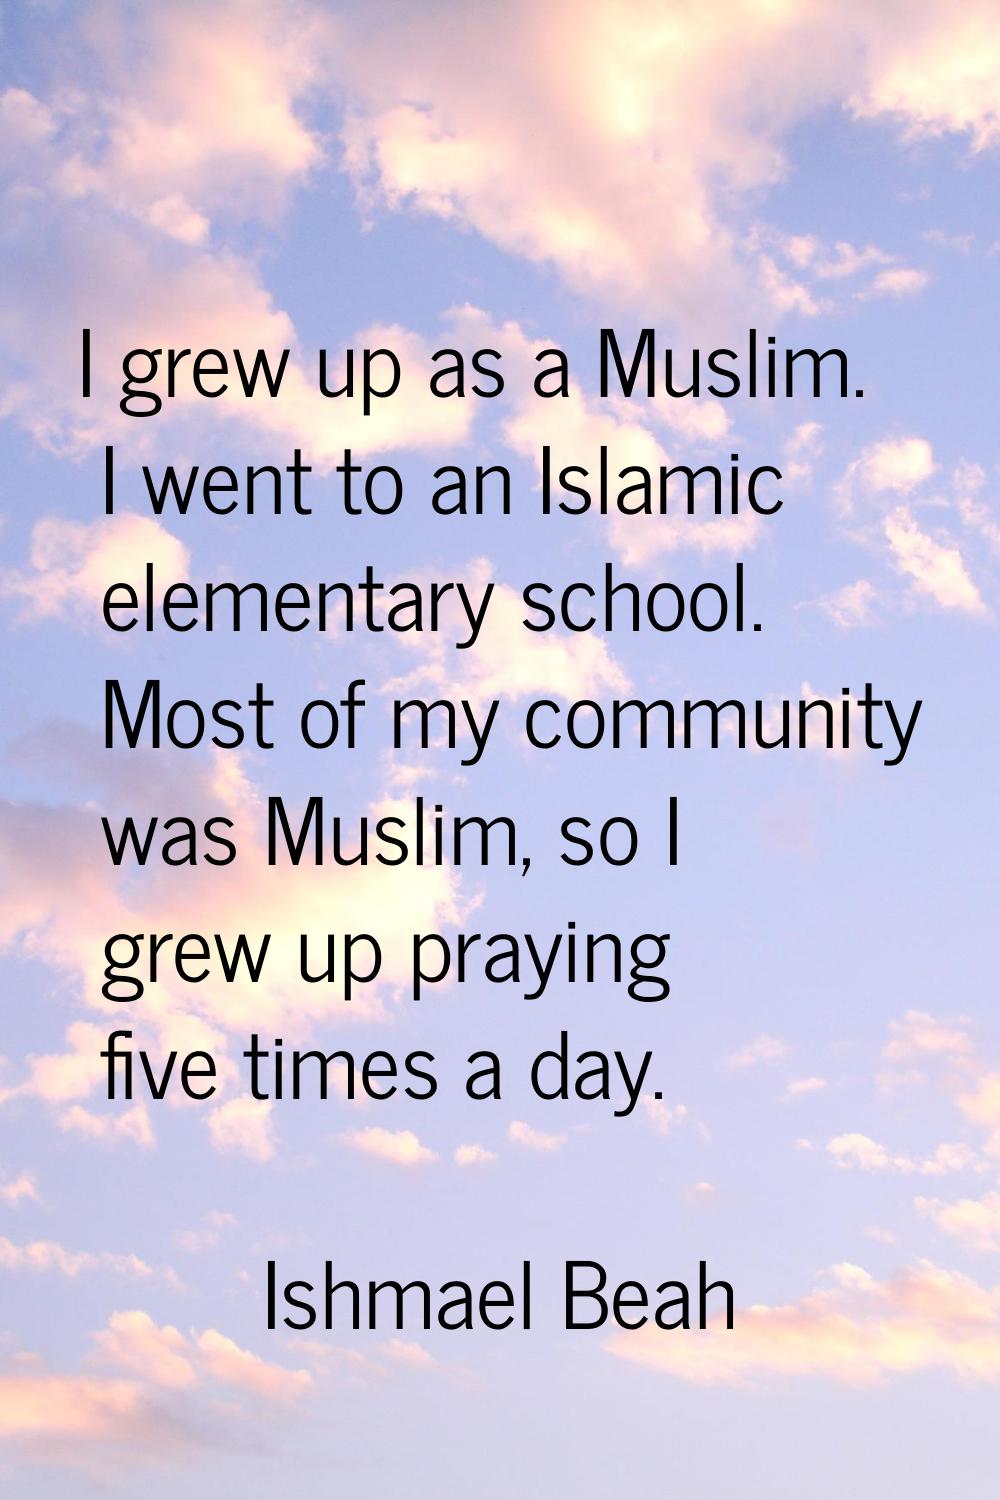 I grew up as a Muslim. I went to an Islamic elementary school. Most of my community was Muslim, so 